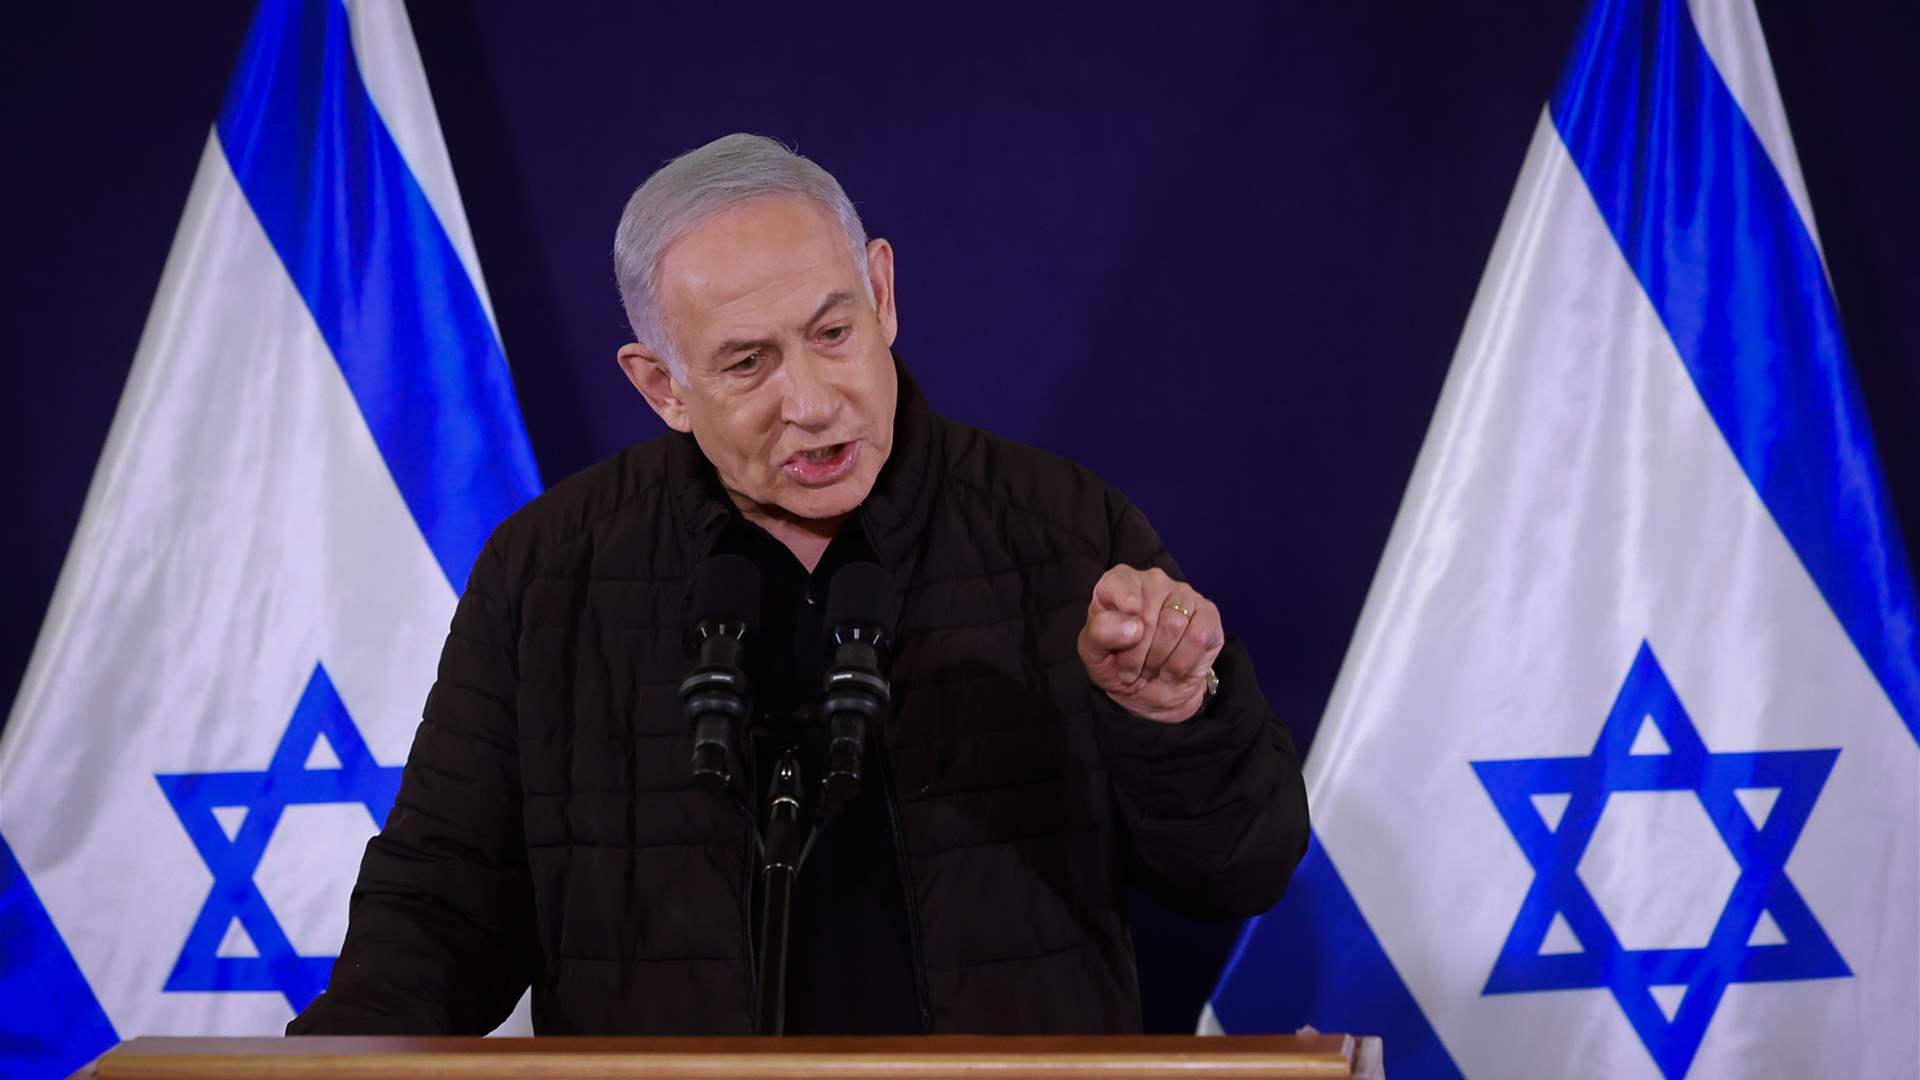 Netanyahu: Hamas prevents Gaza deal, Israel has not changed conditions